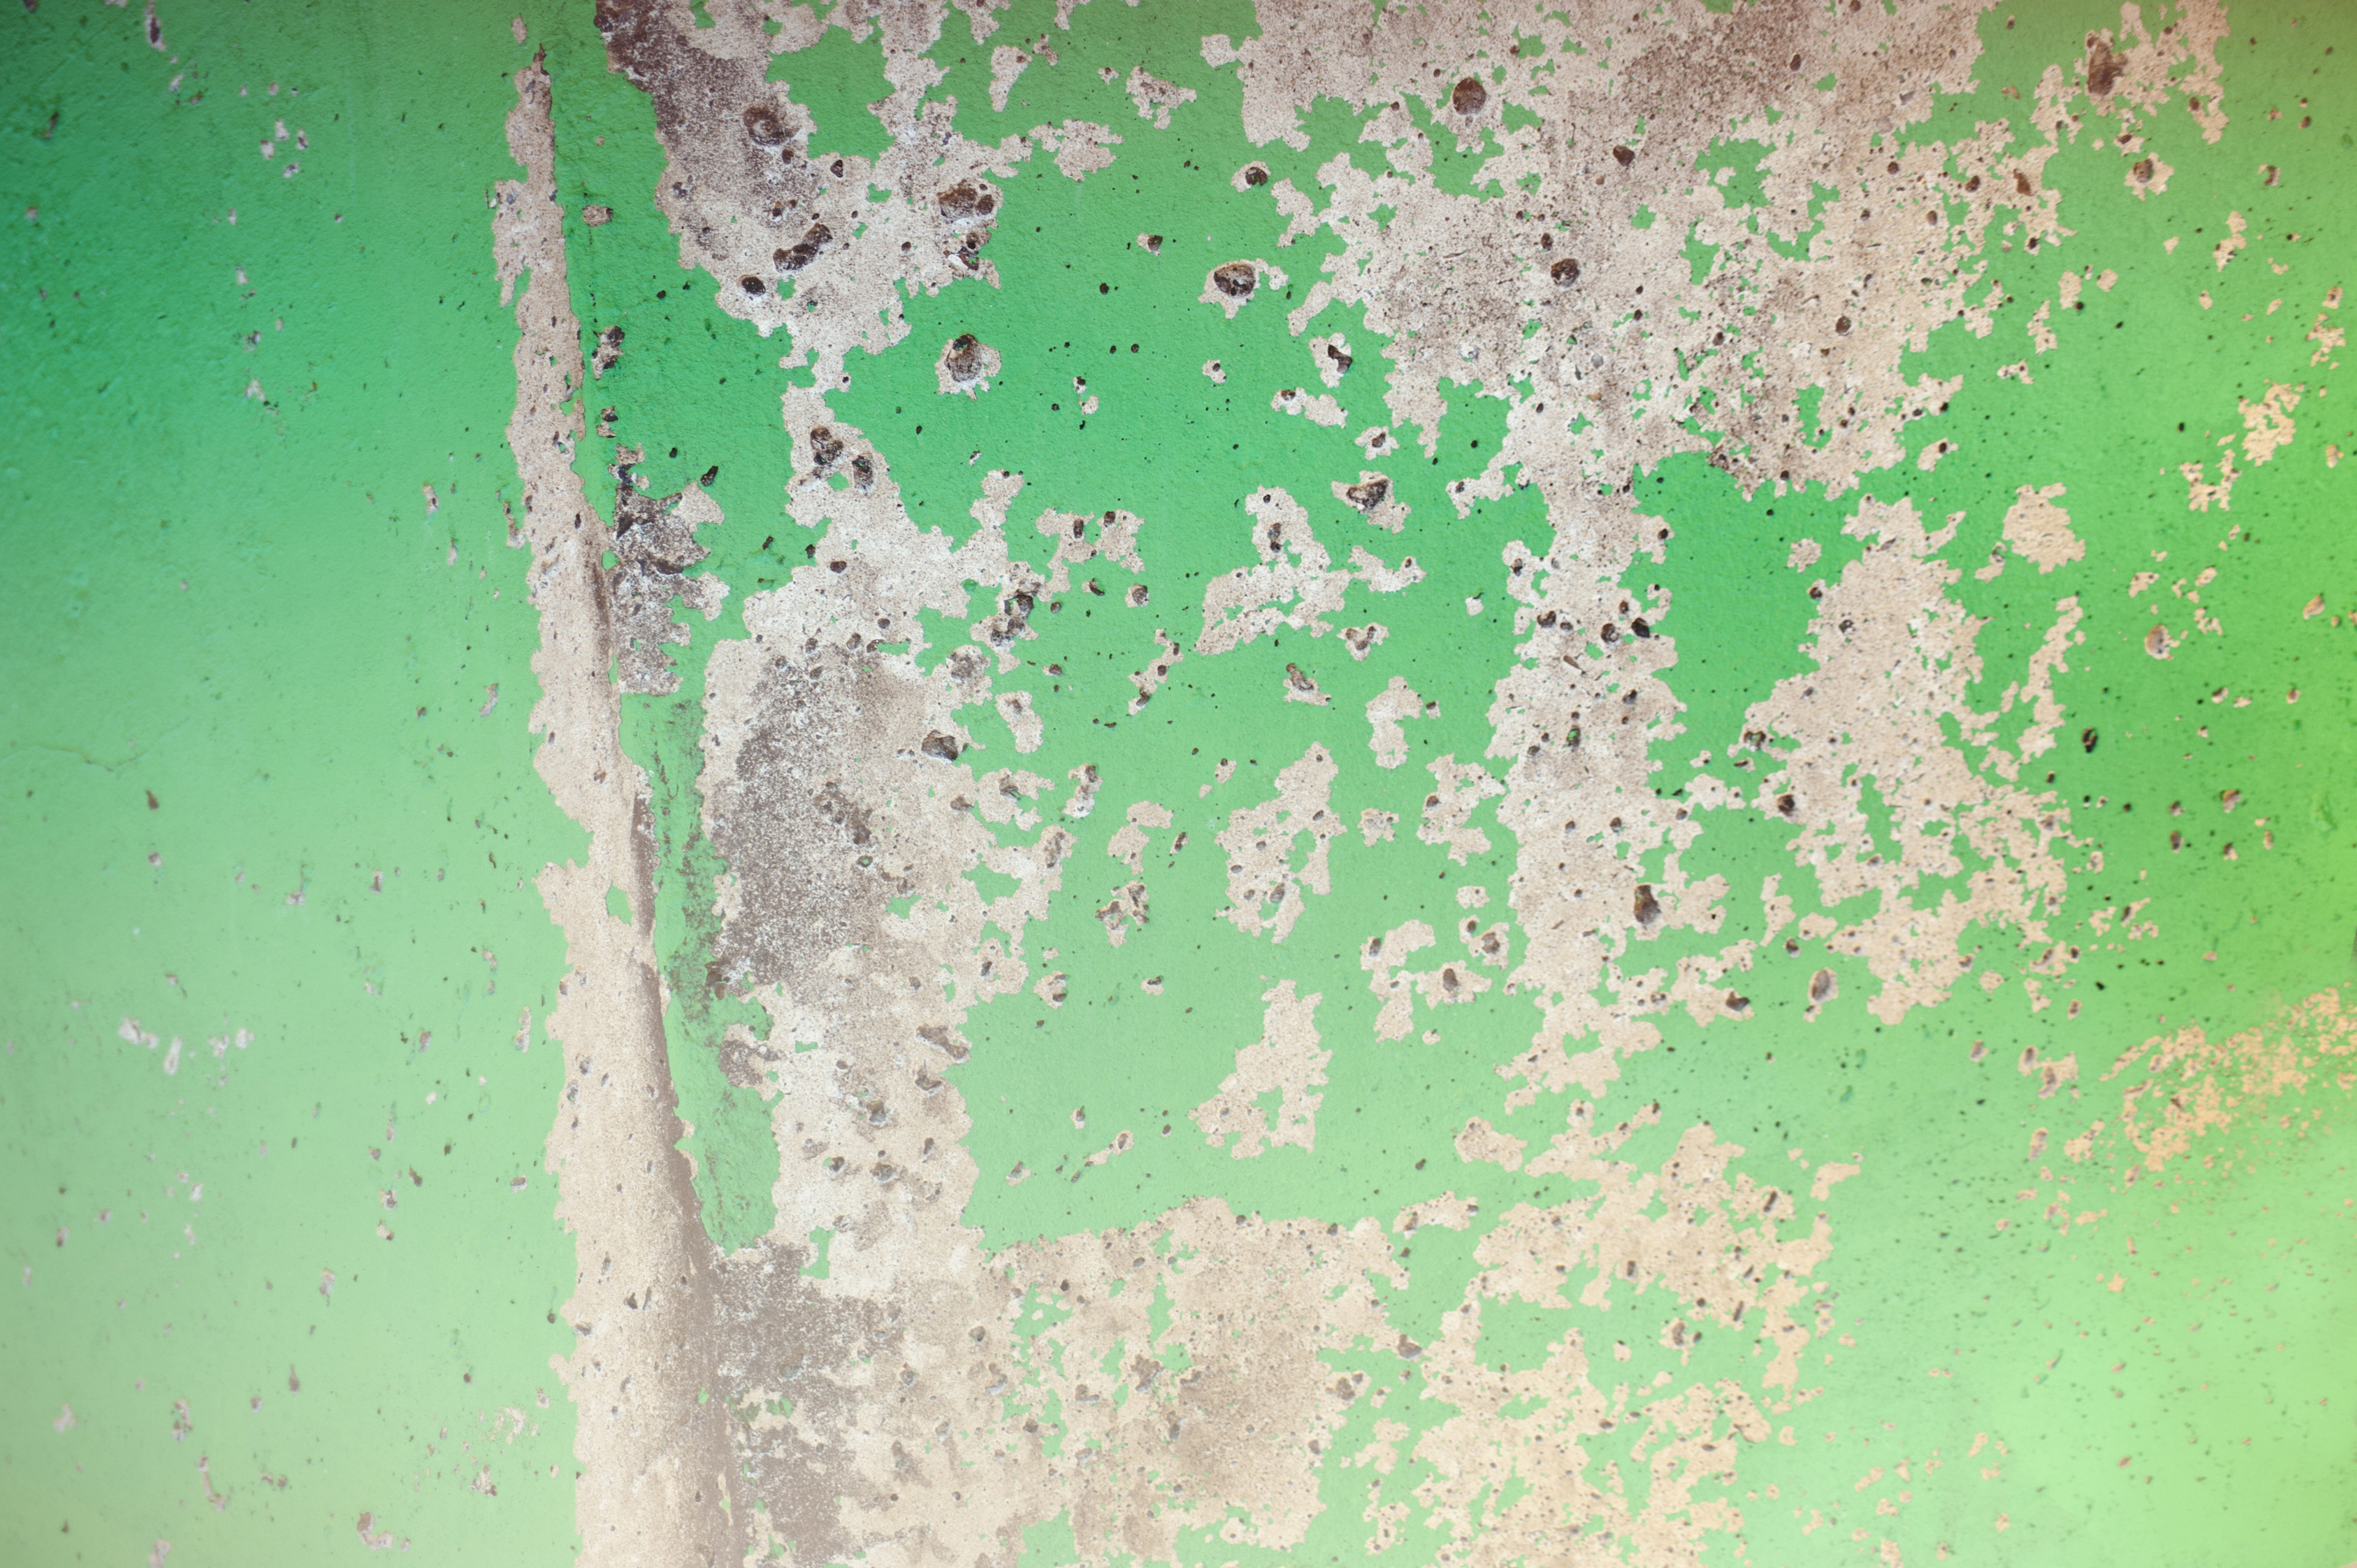 Image of Chipped Green Paint on Cement Wall | Freebie.Photography